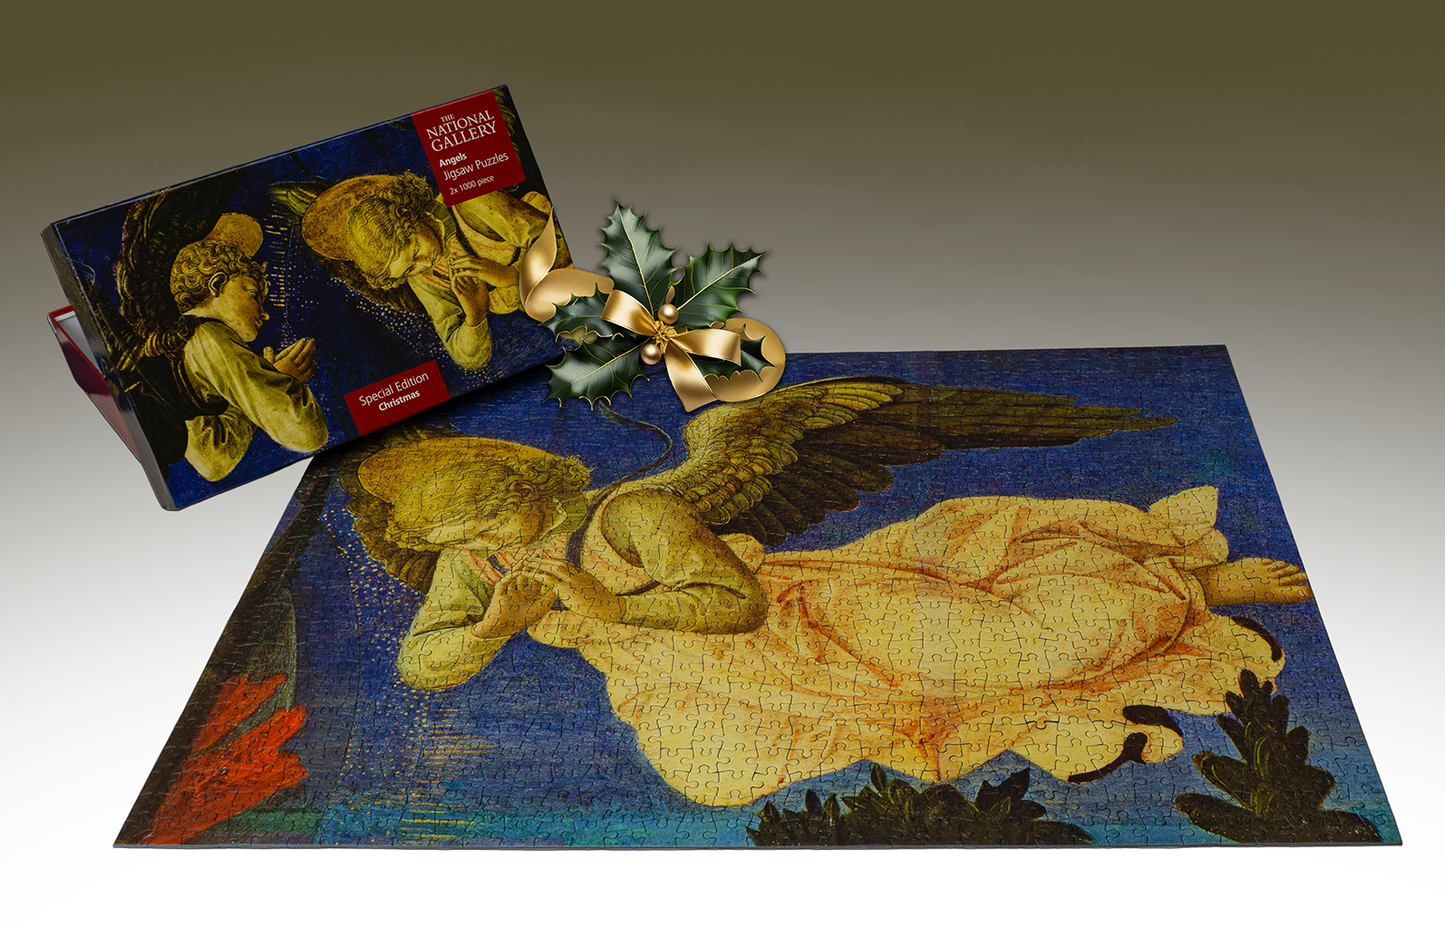 Angels - National Gallery Special Edition 2 x 1000 Piece Jigsaw Puzzle